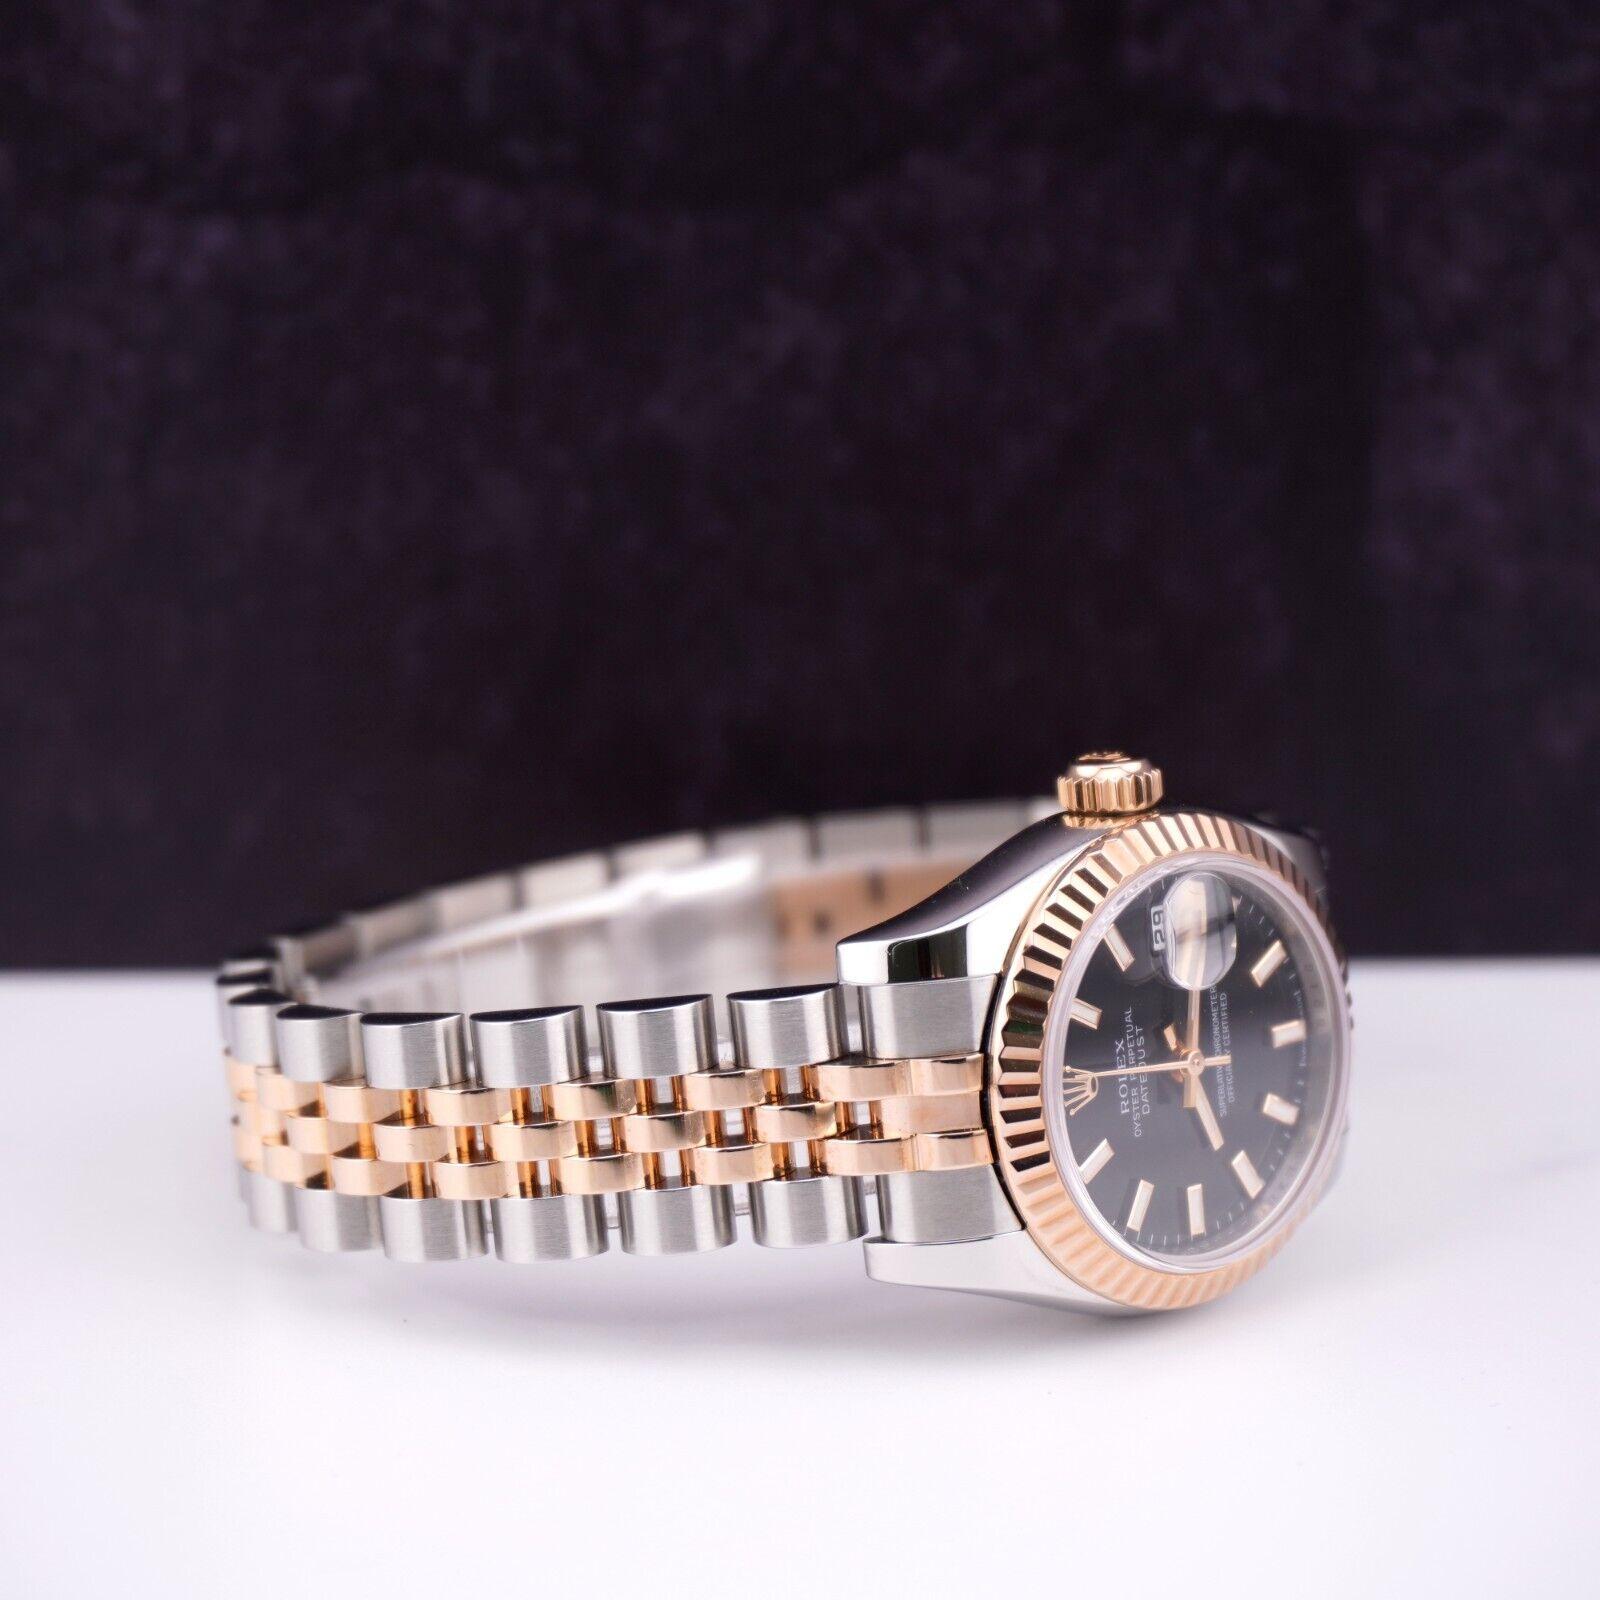 Rolex Datejust 26mm 18k Rose Gold & Steel Fluted Jubilee Black Dial Watch 179171 In Excellent Condition For Sale In Pleasanton, CA